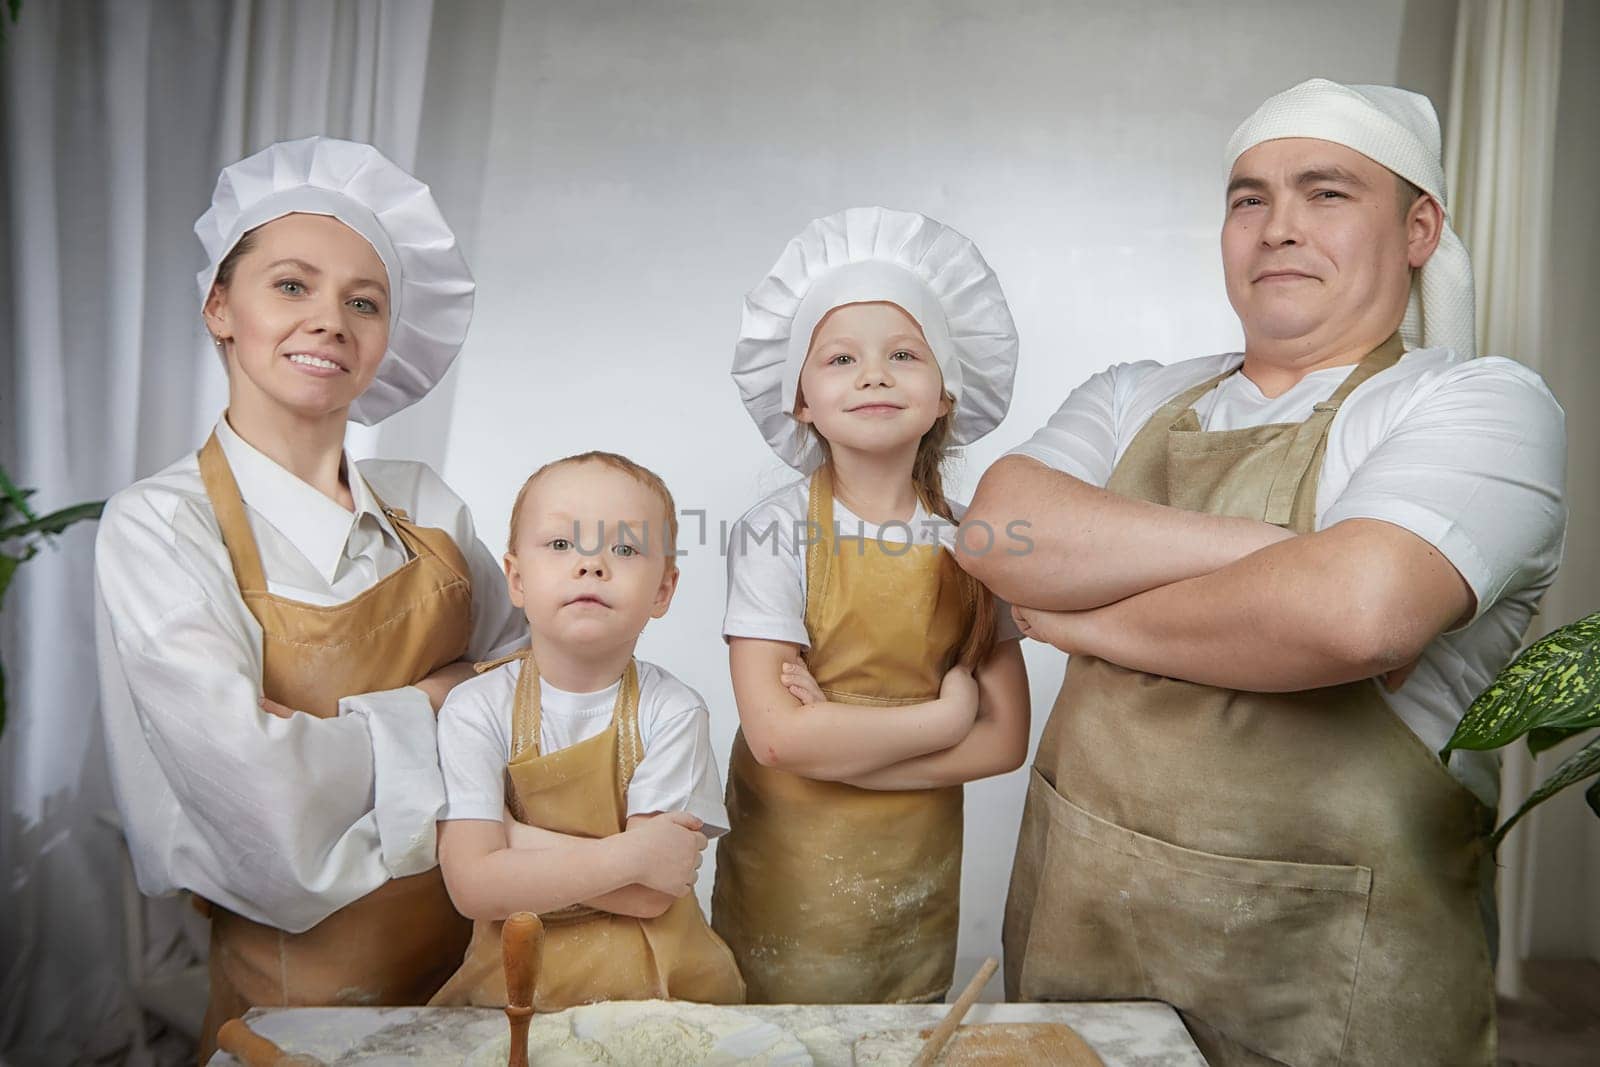 Cute oriental family with mother, father, daughter, son cooking in kitchen on Ramadan, Kurban-Bairam, Eid al-Adha. Funny family at a cook photo shoot. Pancakes, pastries, Maslenitsa, Easter